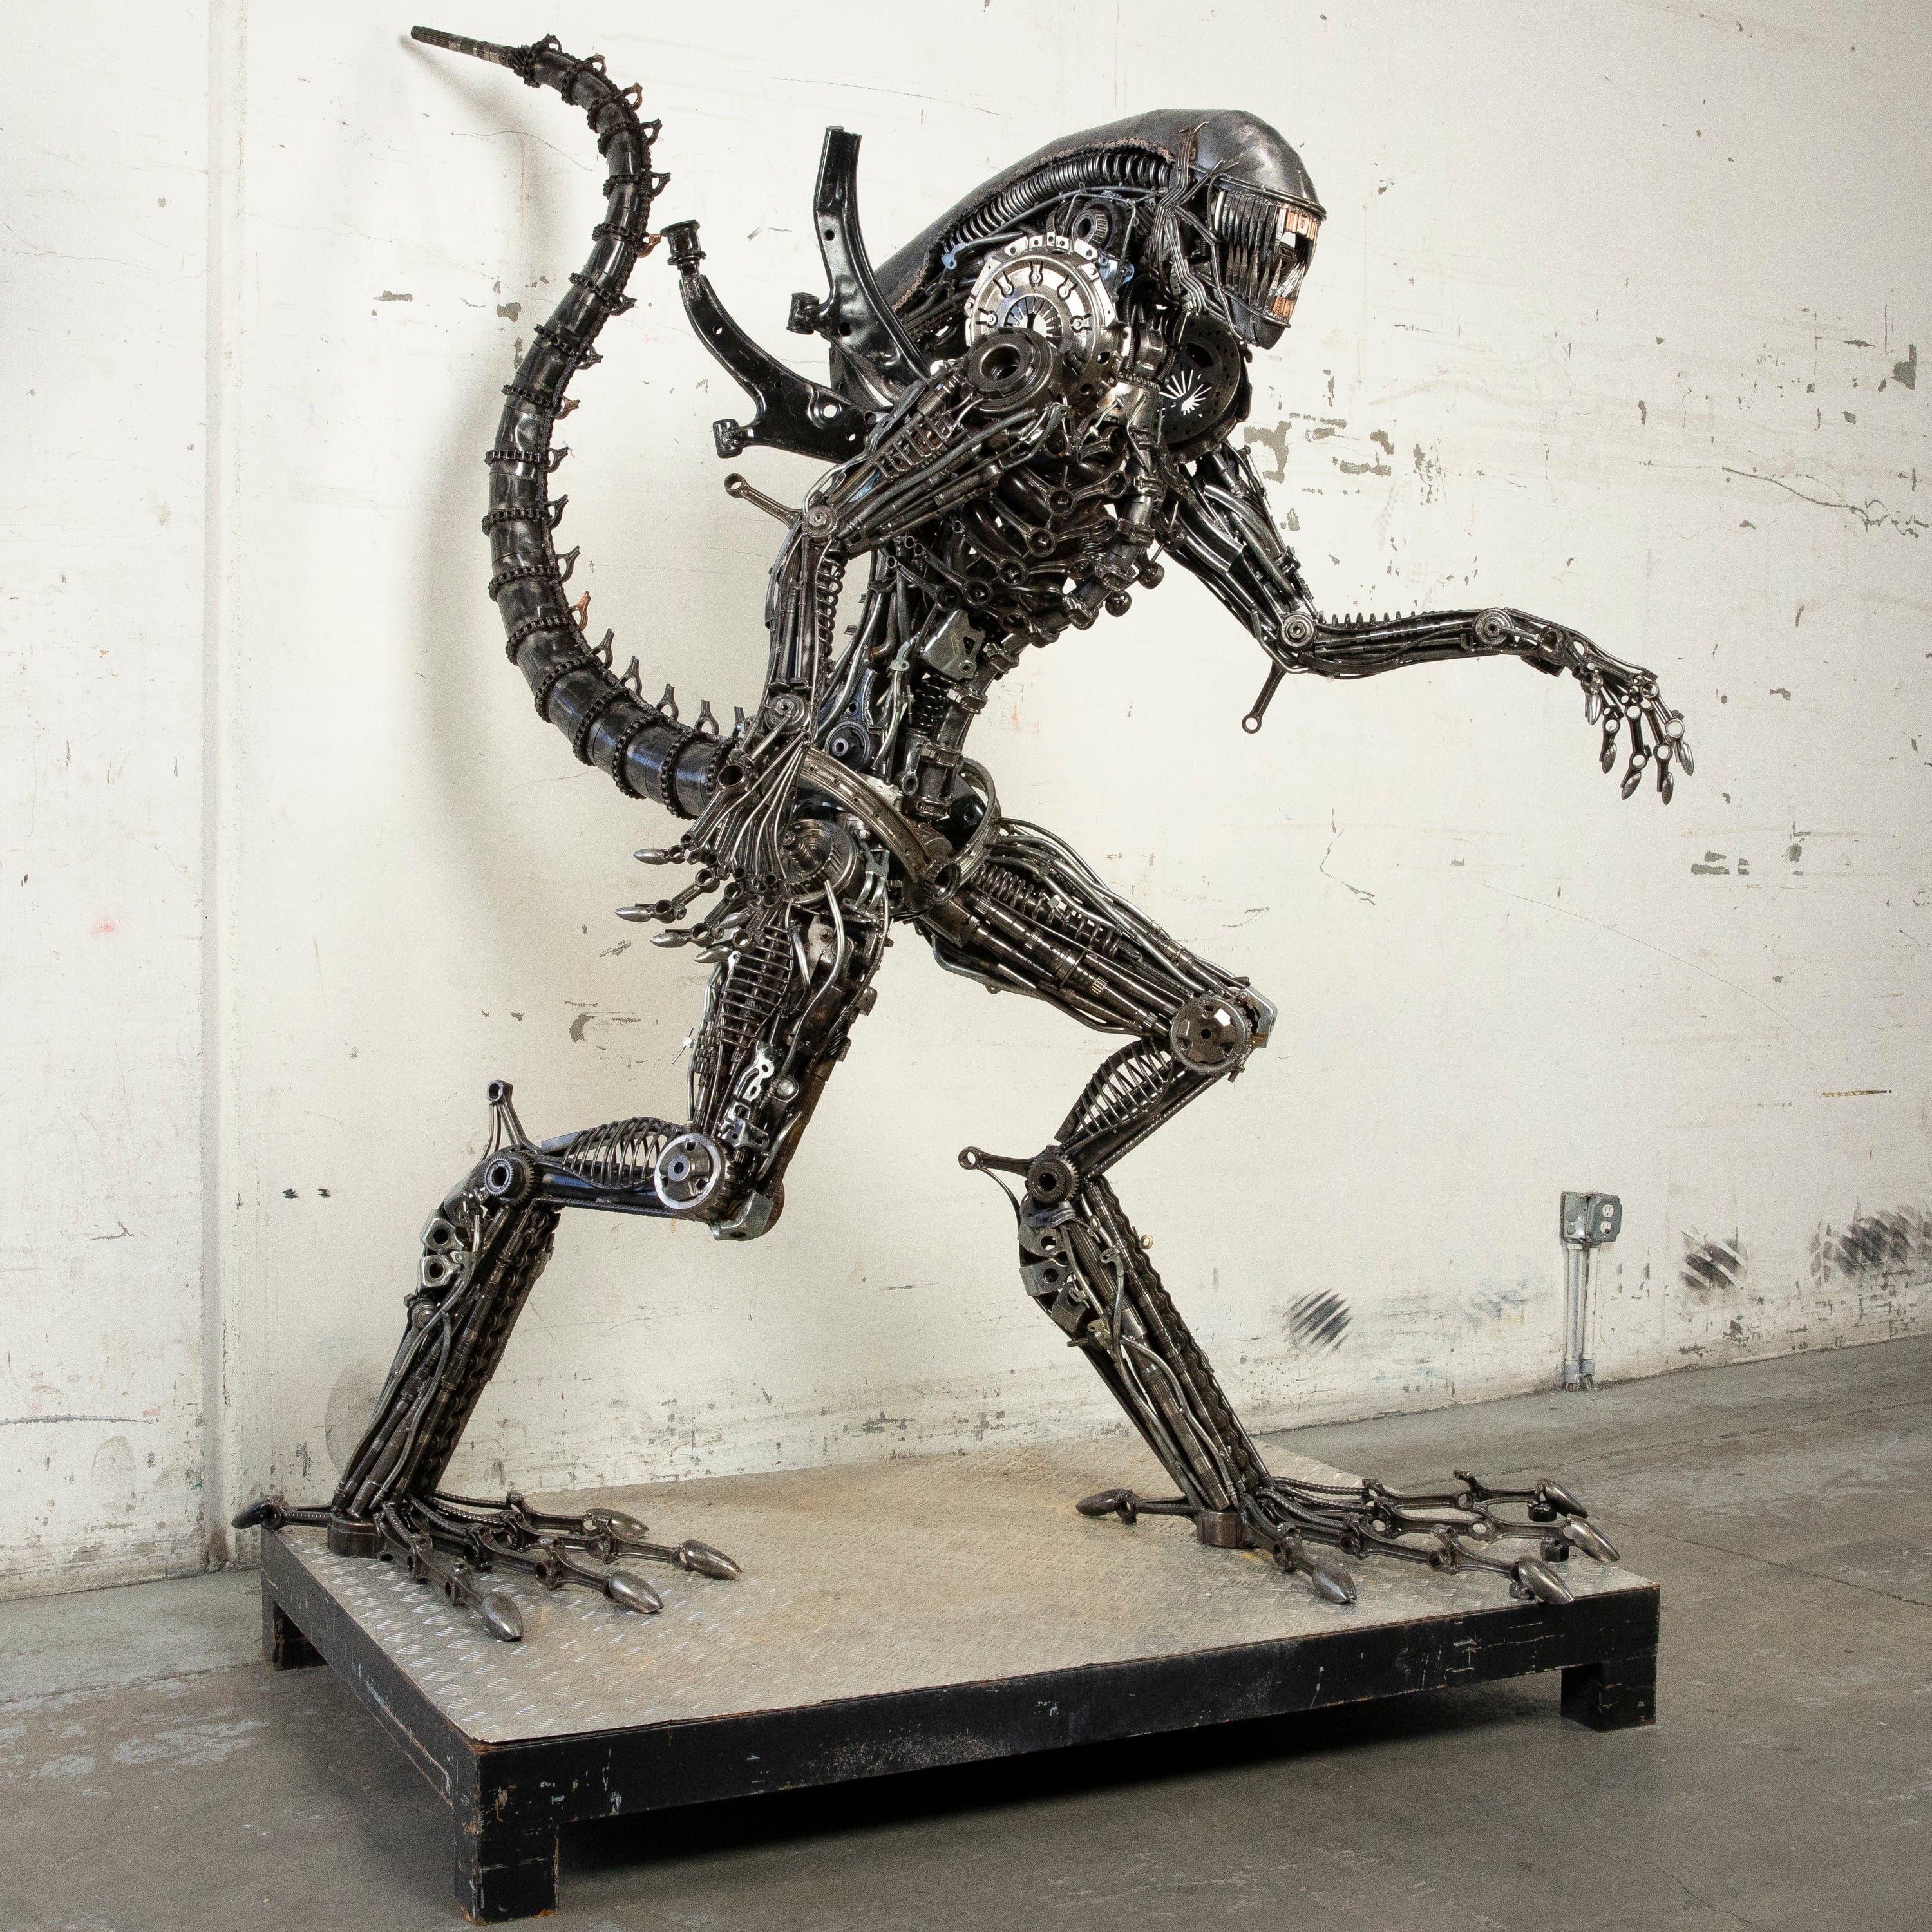 Kalifano Recycled Metal Art 79" Alien Inspired Recycled Metal Art Sculpture RMS-A200-S03